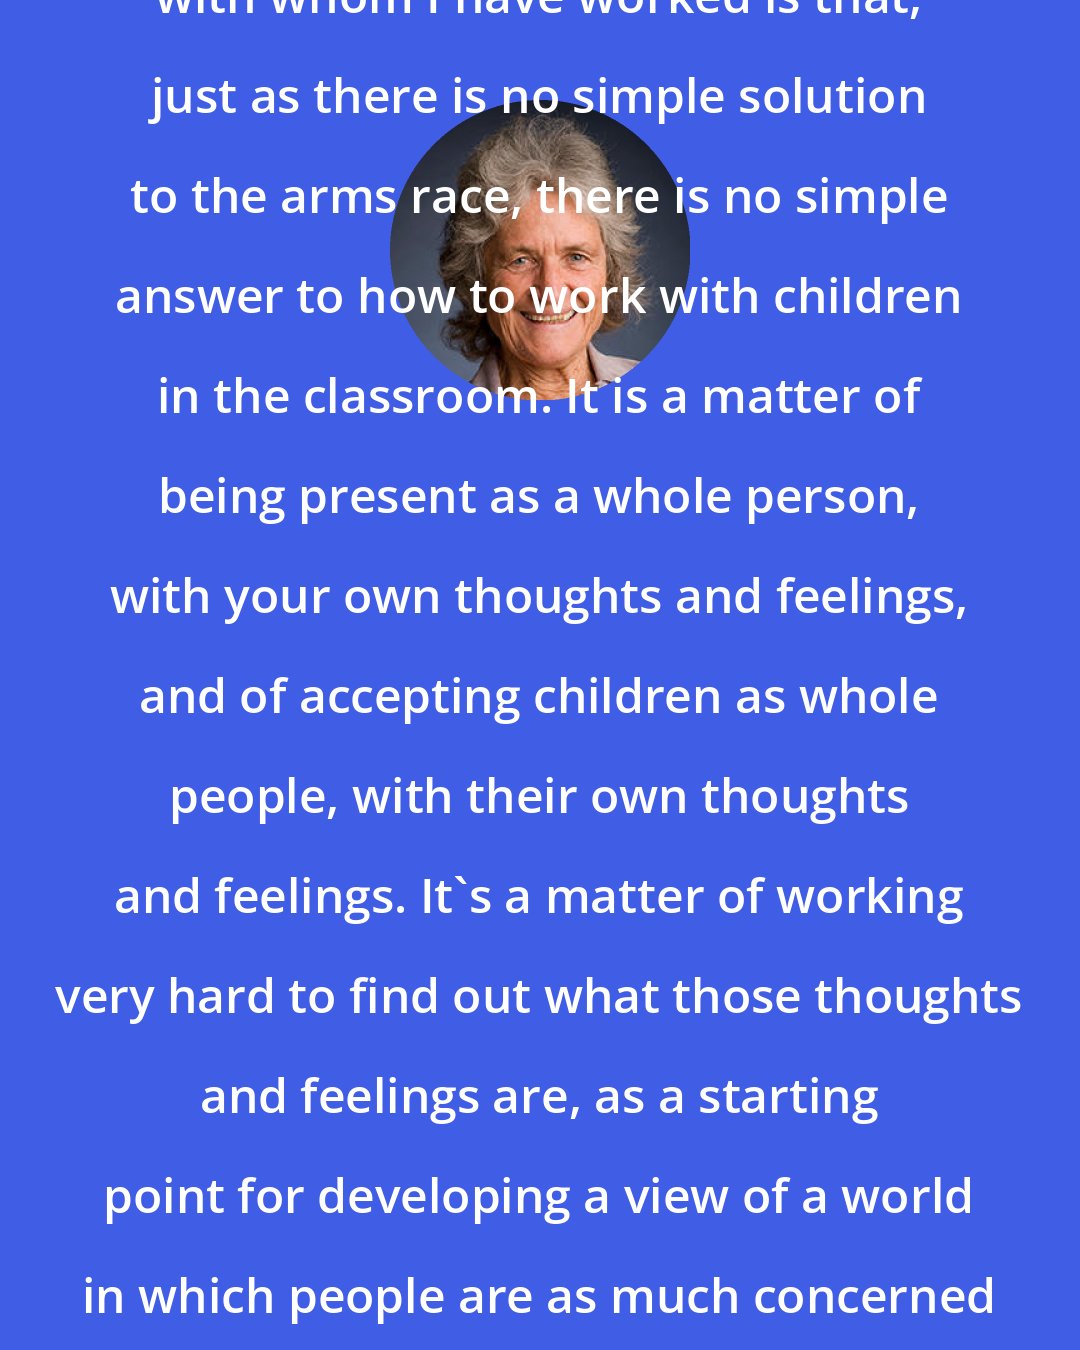 Eleanor Duckworth: What I have learned from the teachers with whom I have worked is that, just as there is no simple solution to the arms race, there is no simple answer to how to work with children in the classroom. It is a matter of being present as a whole person, with your own thoughts and feelings, and of accepting children as whole people, with their own thoughts and feelings. It's a matter of working very hard to find out what those thoughts and feelings are, as a starting point for developing a view of a world in which people are as much concerned about other people security as they are about their own